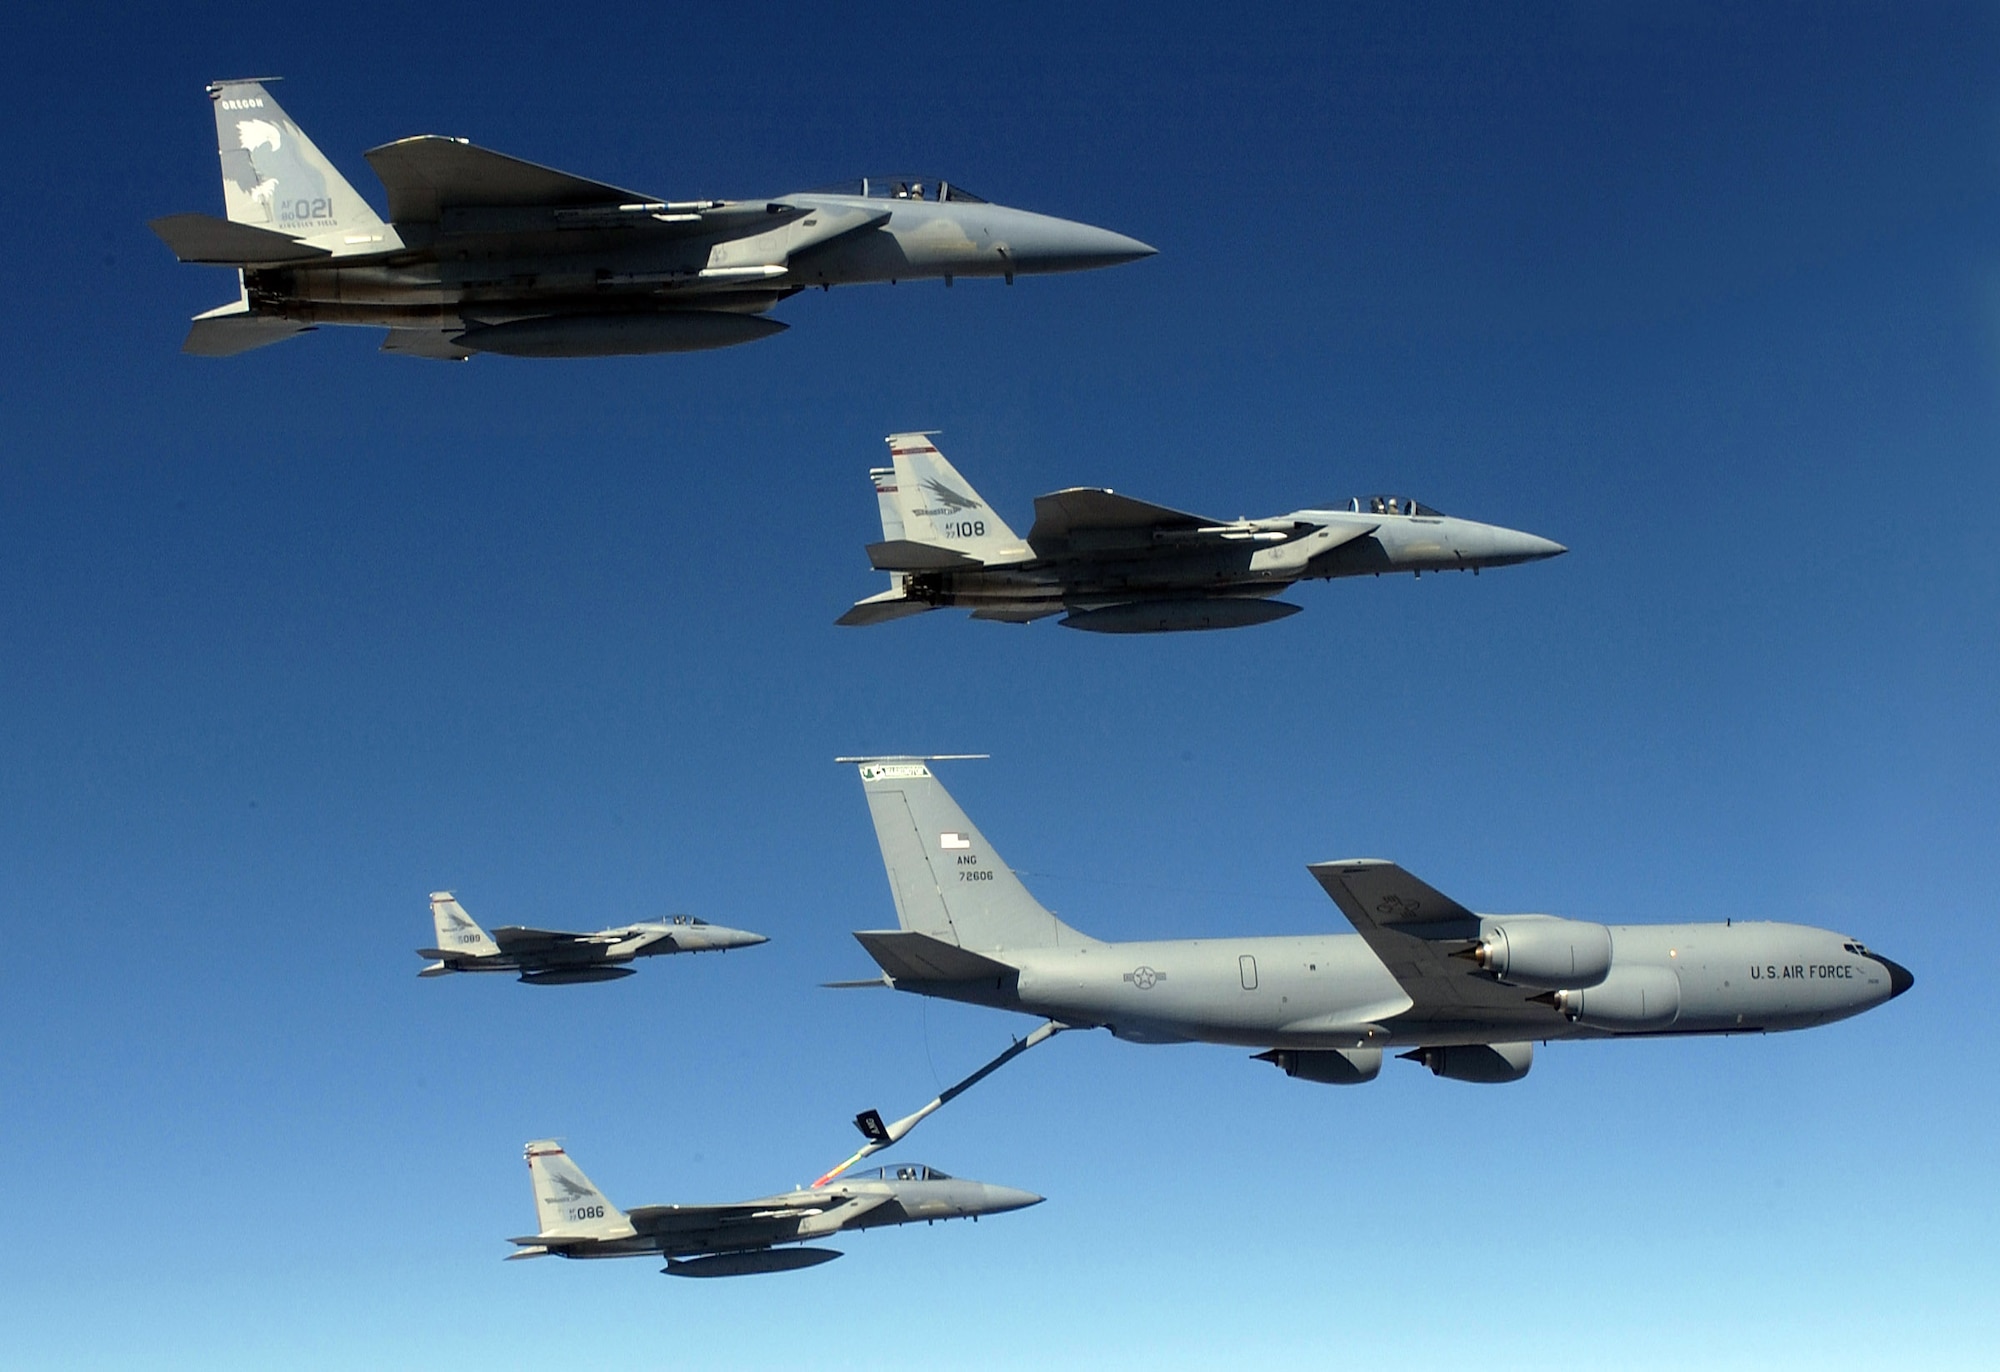 Air Force Chief of Staff General T. Michael Moseley has said that the replacement for the KC-135 Stratotanker, shown here refueling F-15 Eagles, has moved up to the top position for procurement priority because of its enabling effect on all other strategic capabilities of the Air Force.  (U.S. Air Force photo/Staff Sgt. James L. Harper Jr.)